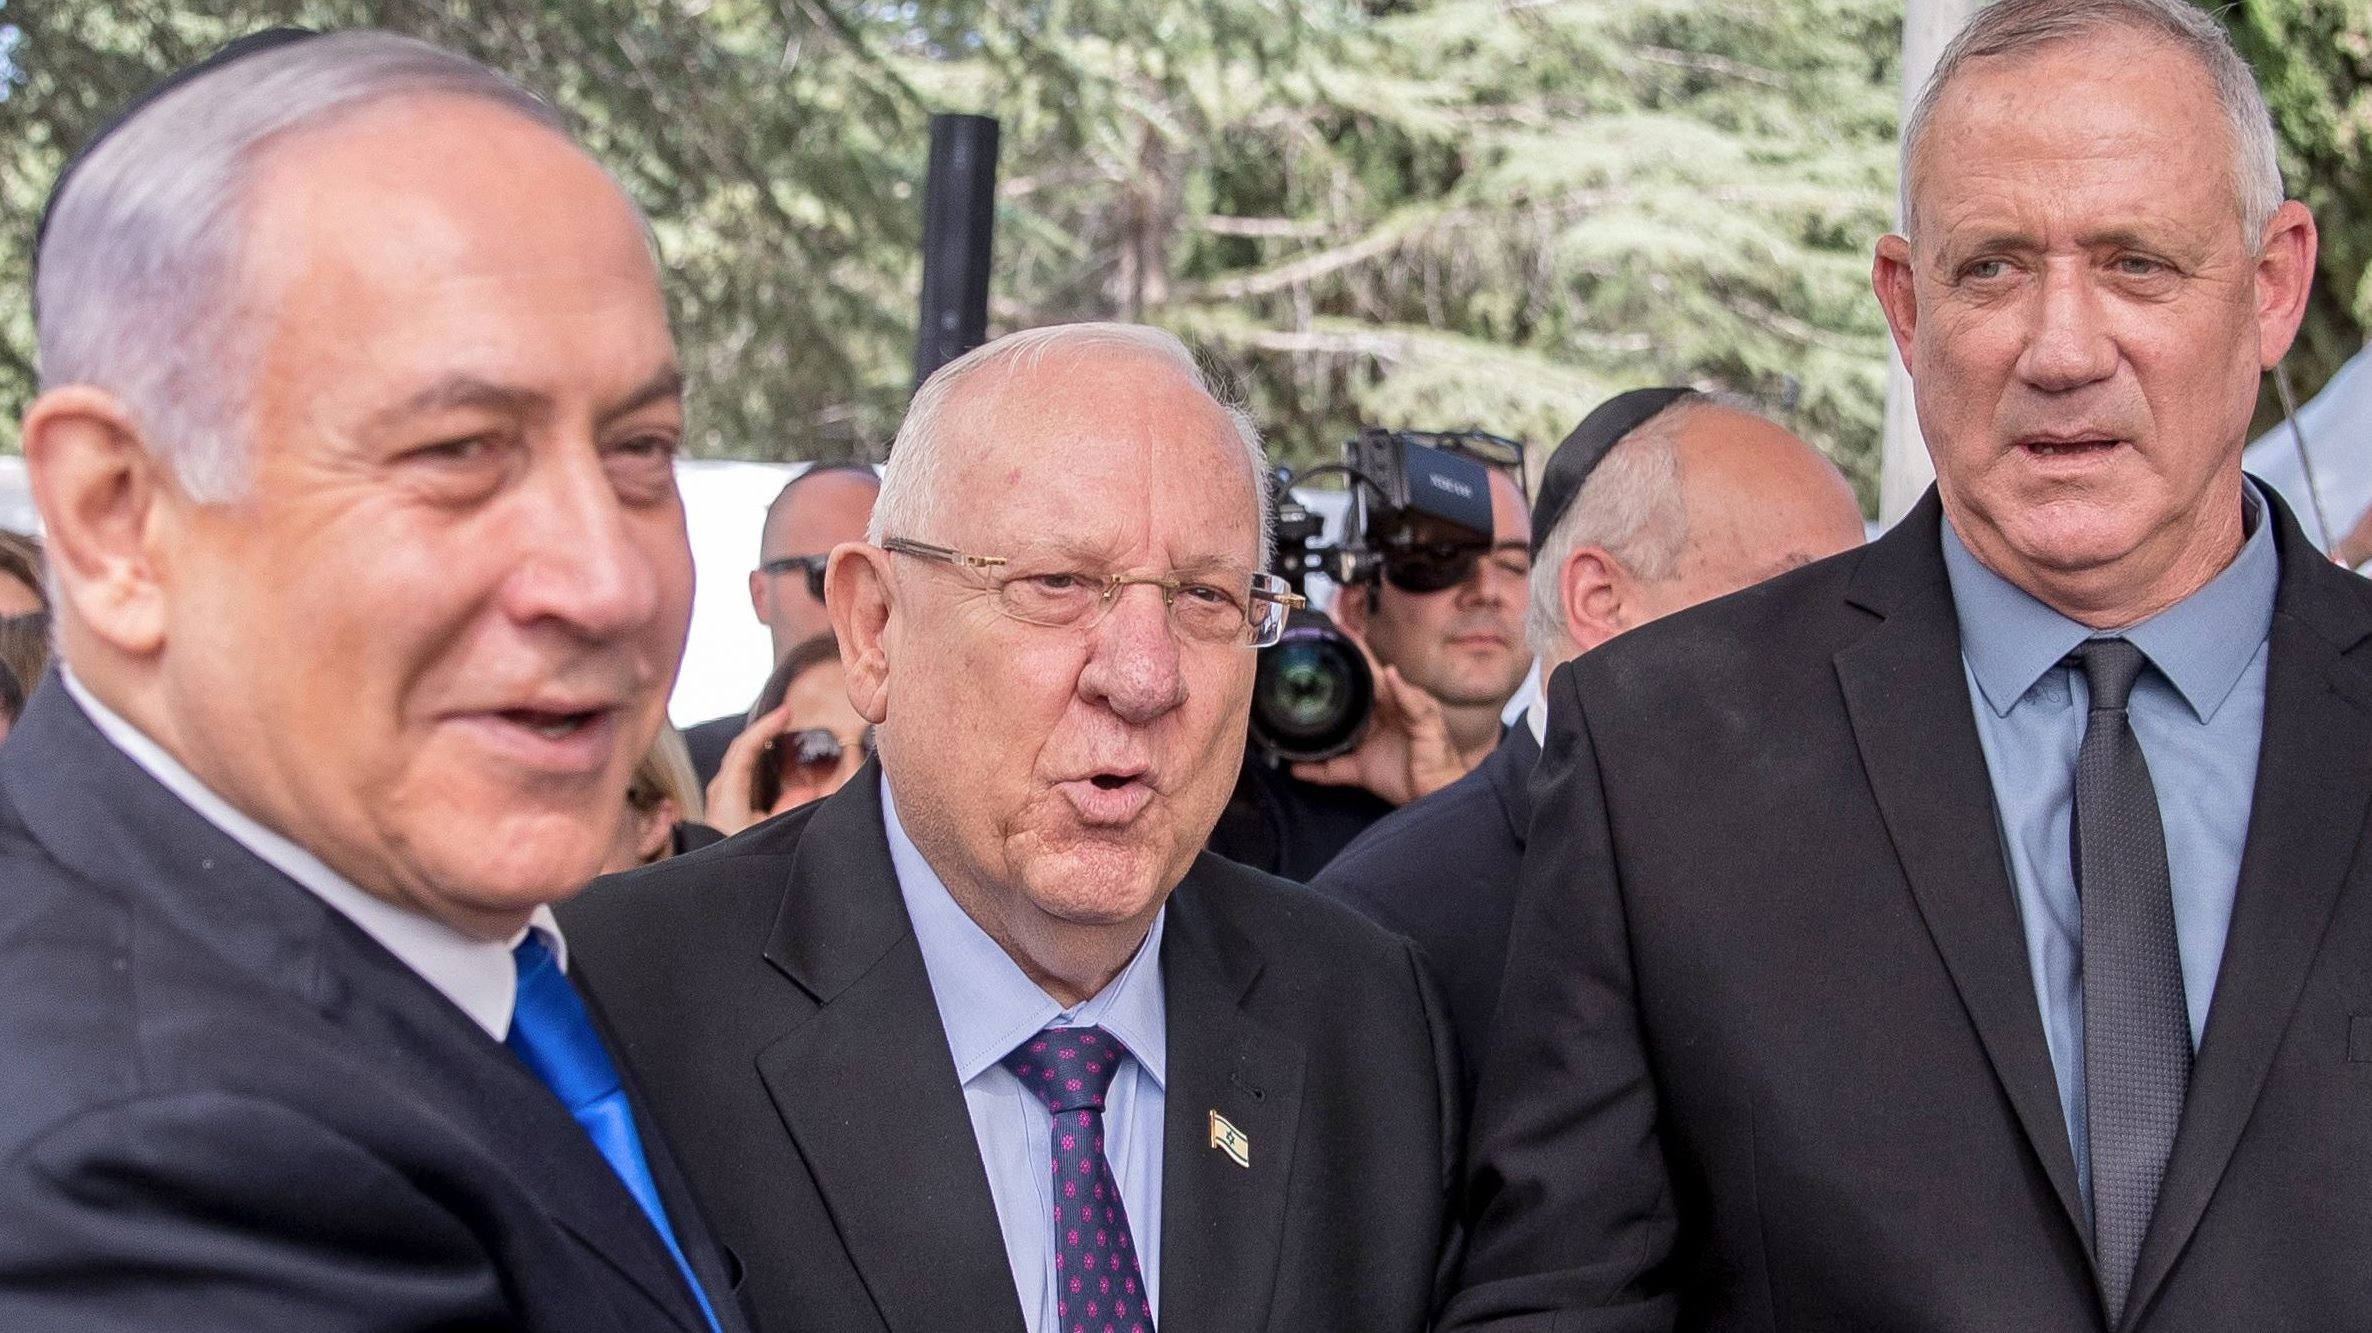 With Mandate to Form Israel’s Next Government, Netanyahu is under Pressure